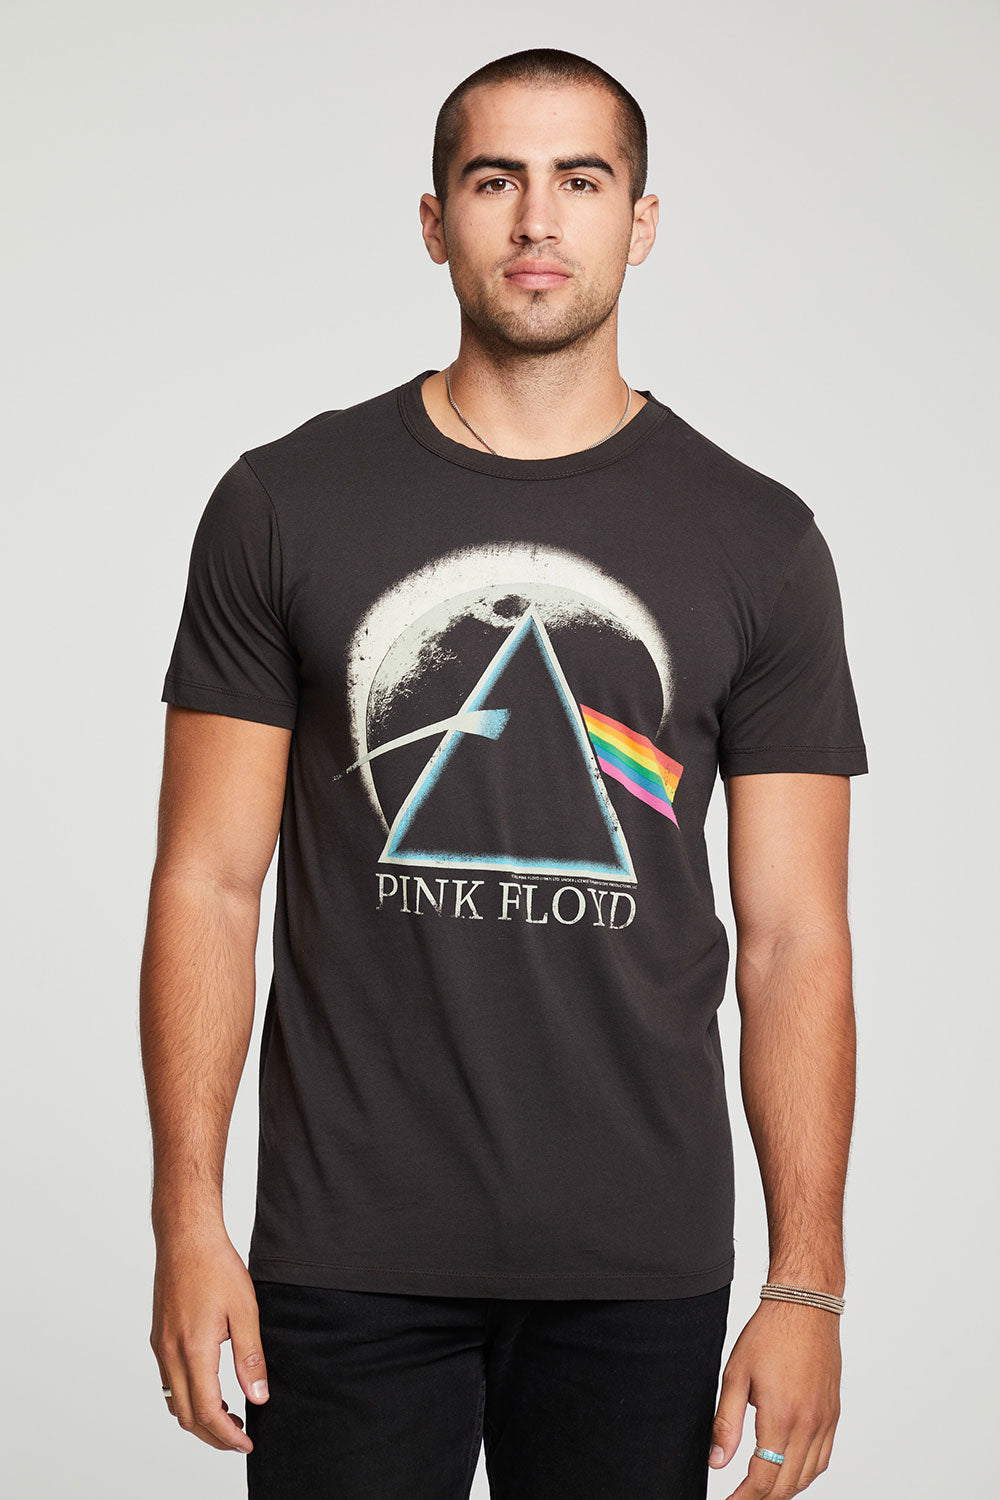 Pink Floyd Dark Side of the Moon Tour MENS chaserbrand